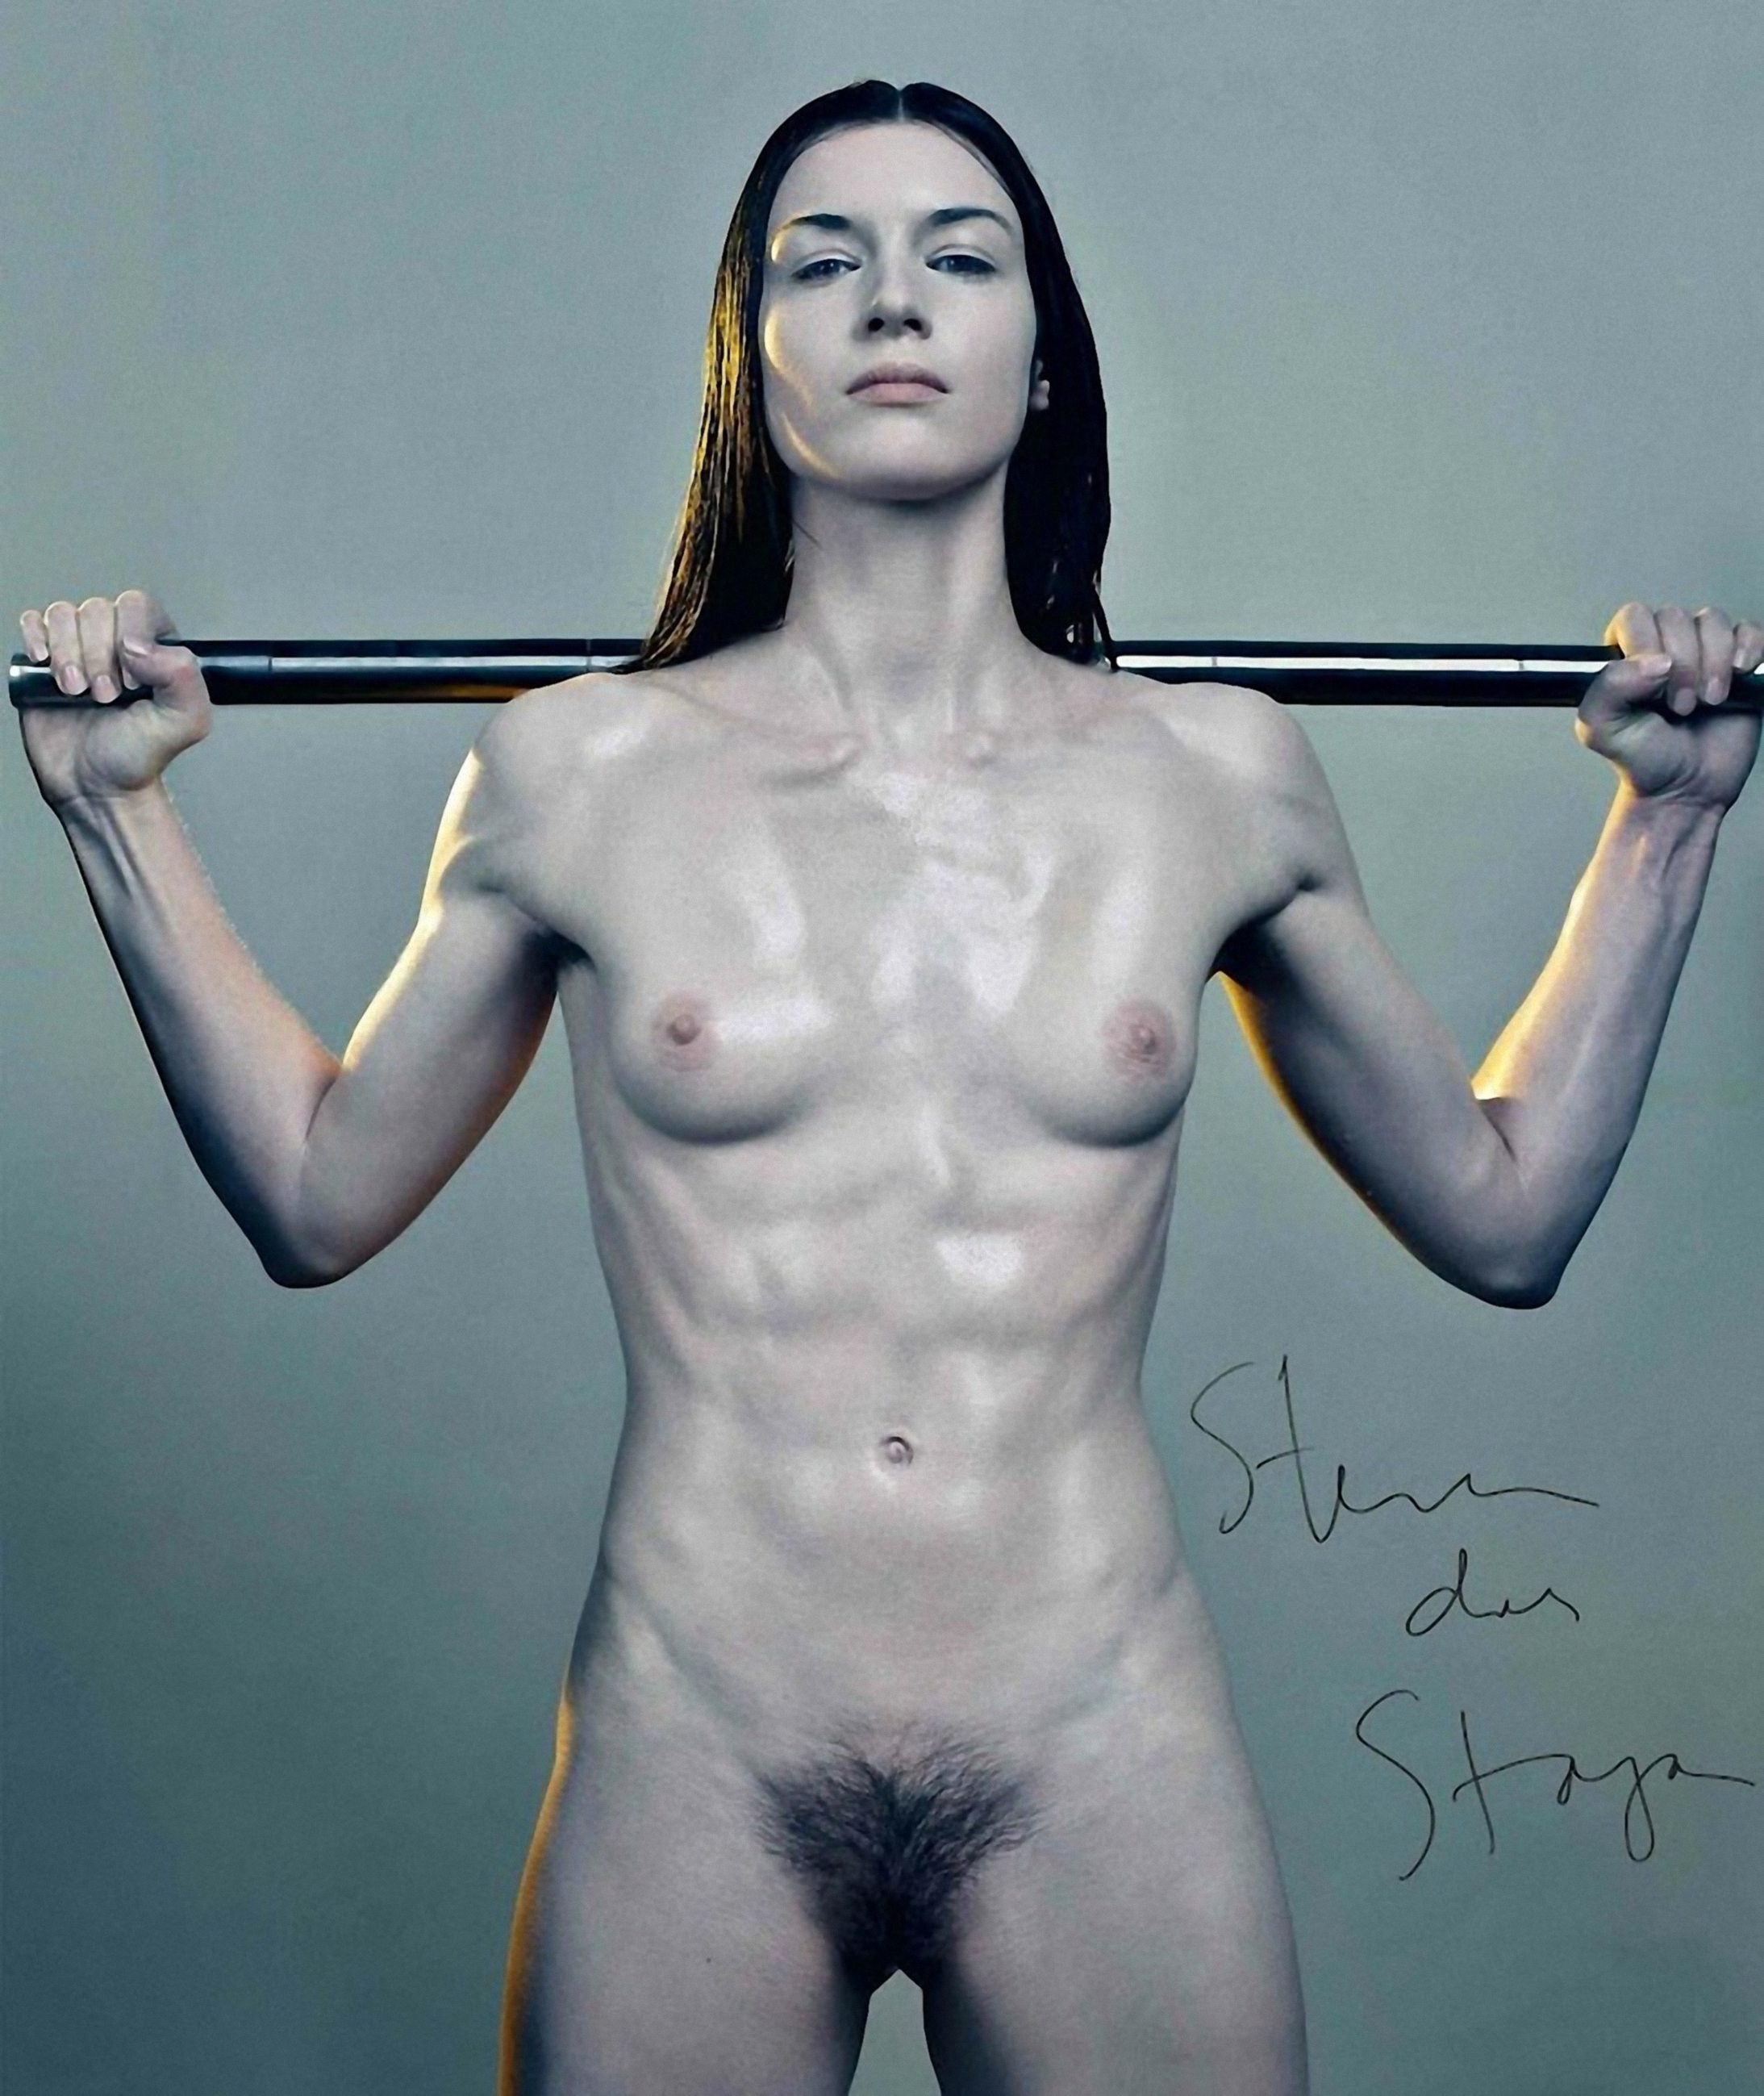 Picture tagged with: Skinny, Brunette, Stoya, Fit, Flat chested, Hairy, Sma...